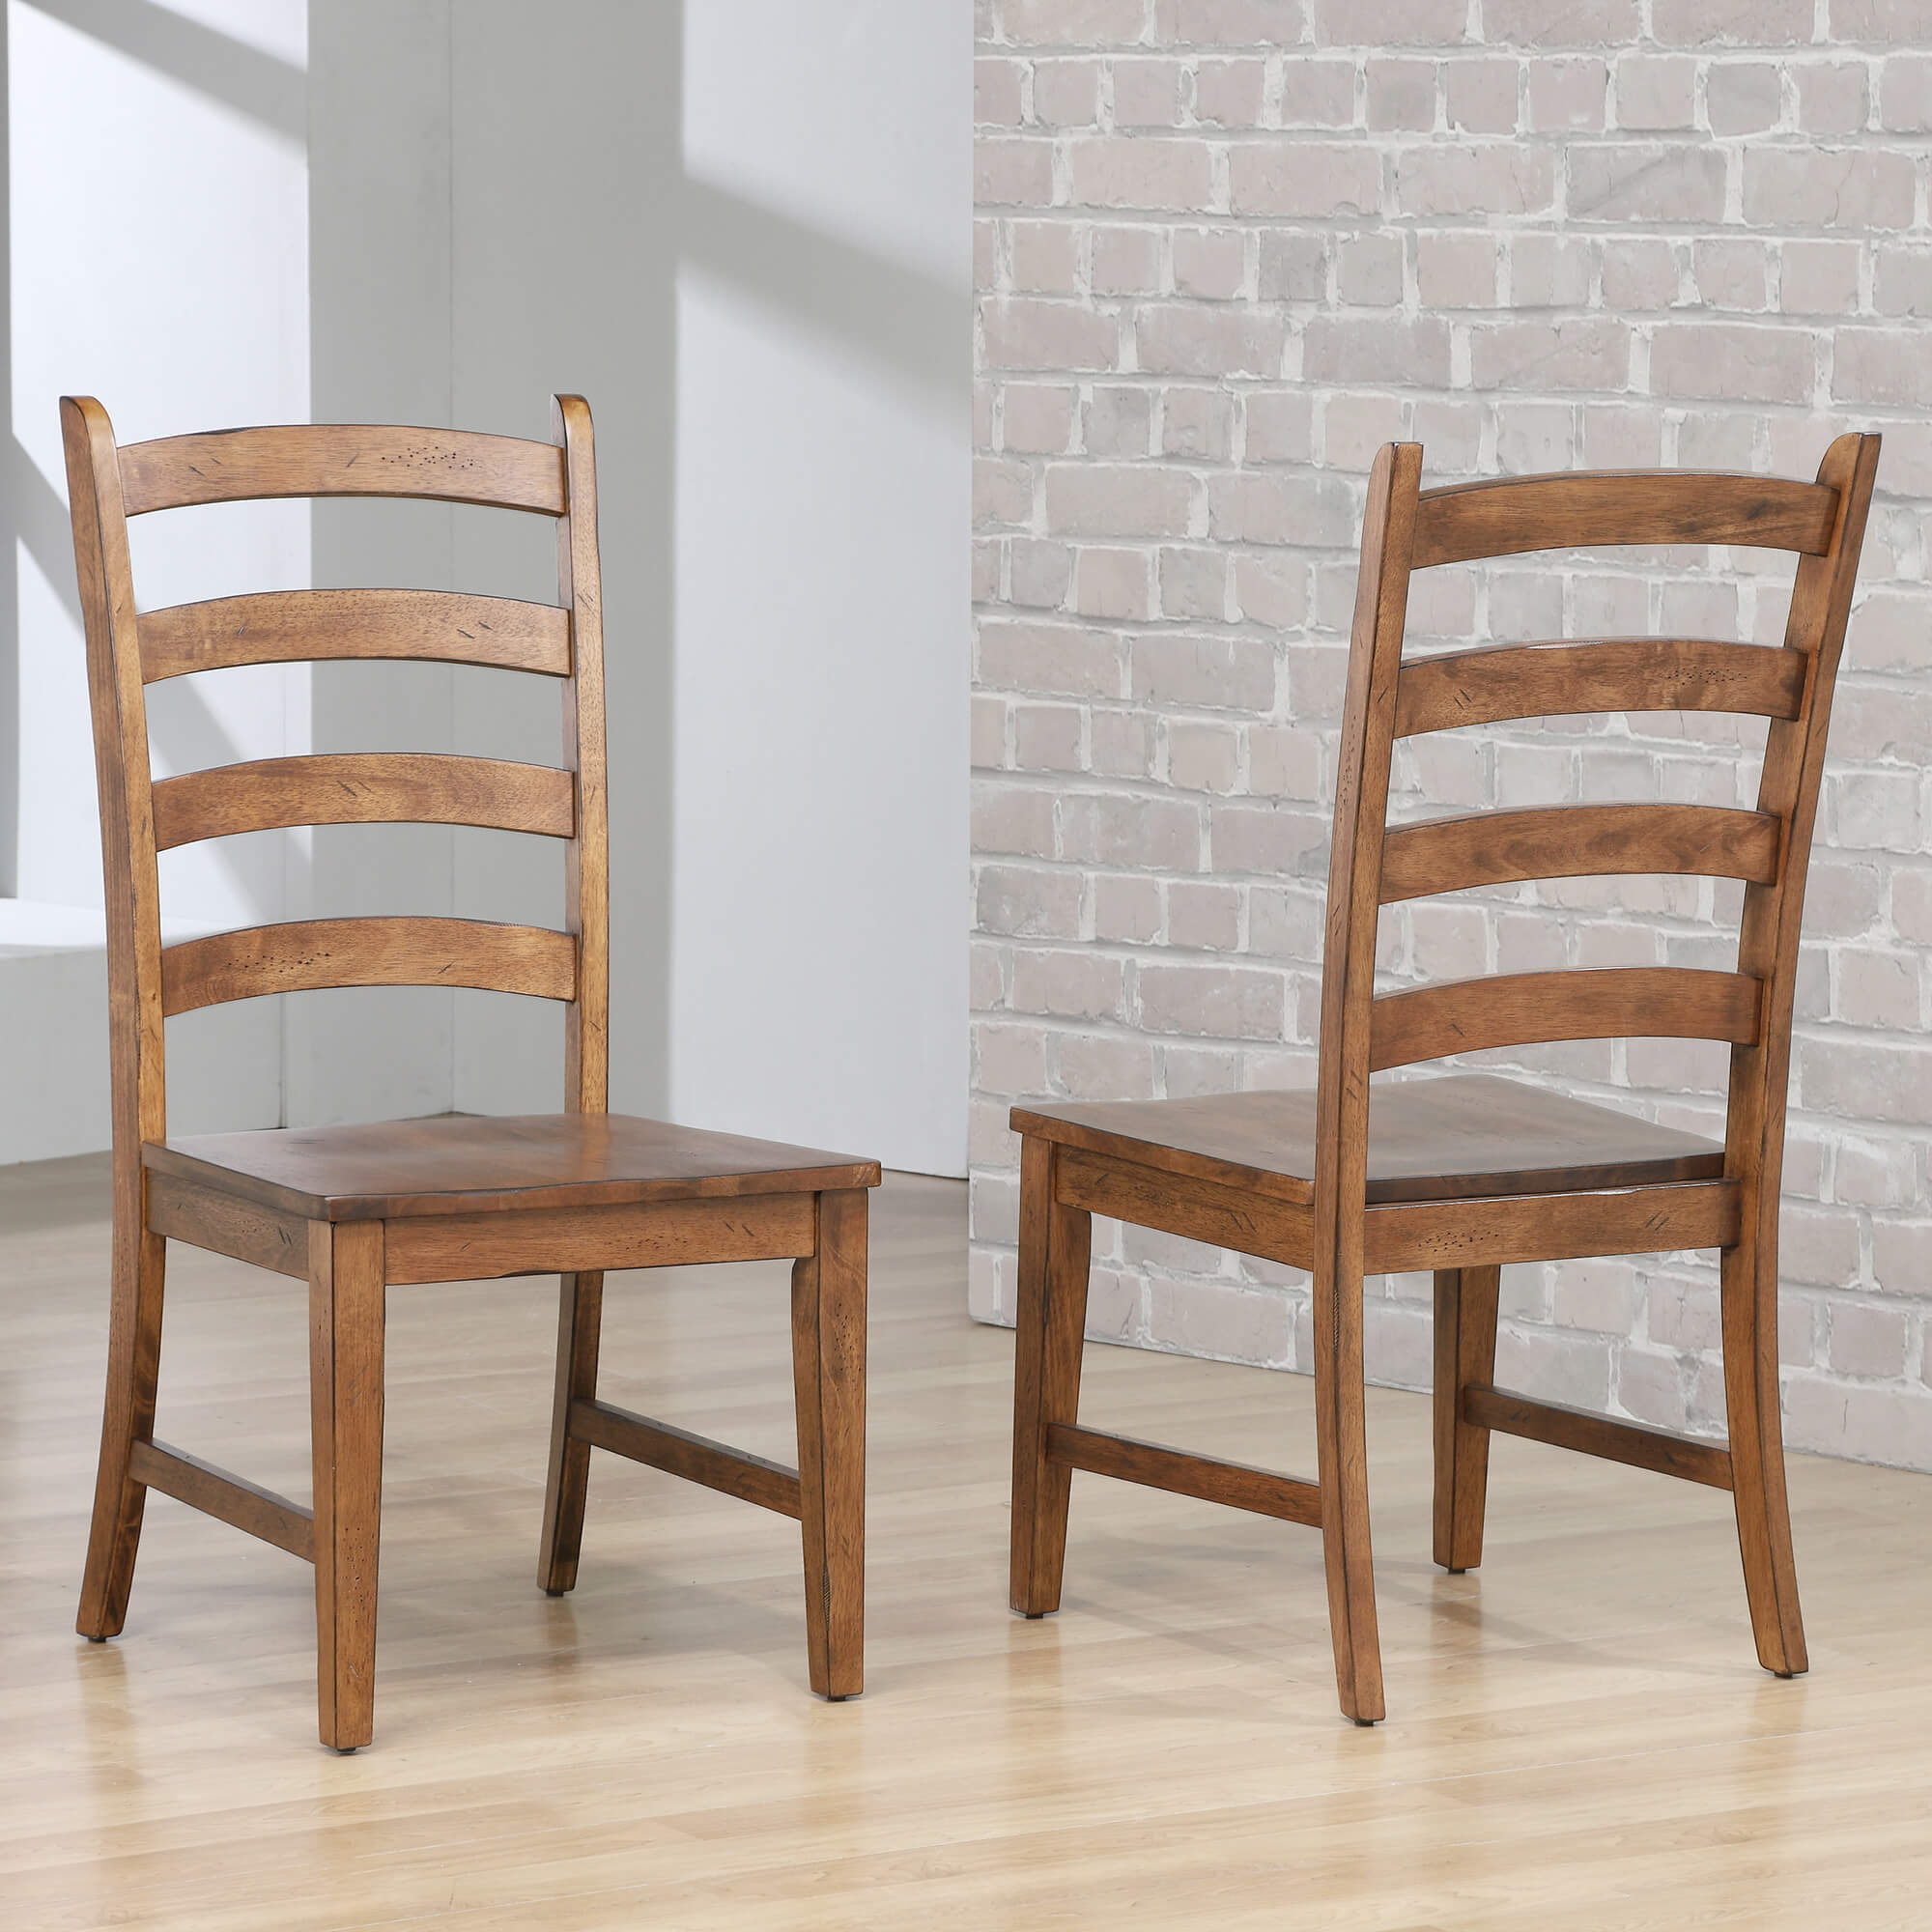 Straight Ladder Back Side Chair